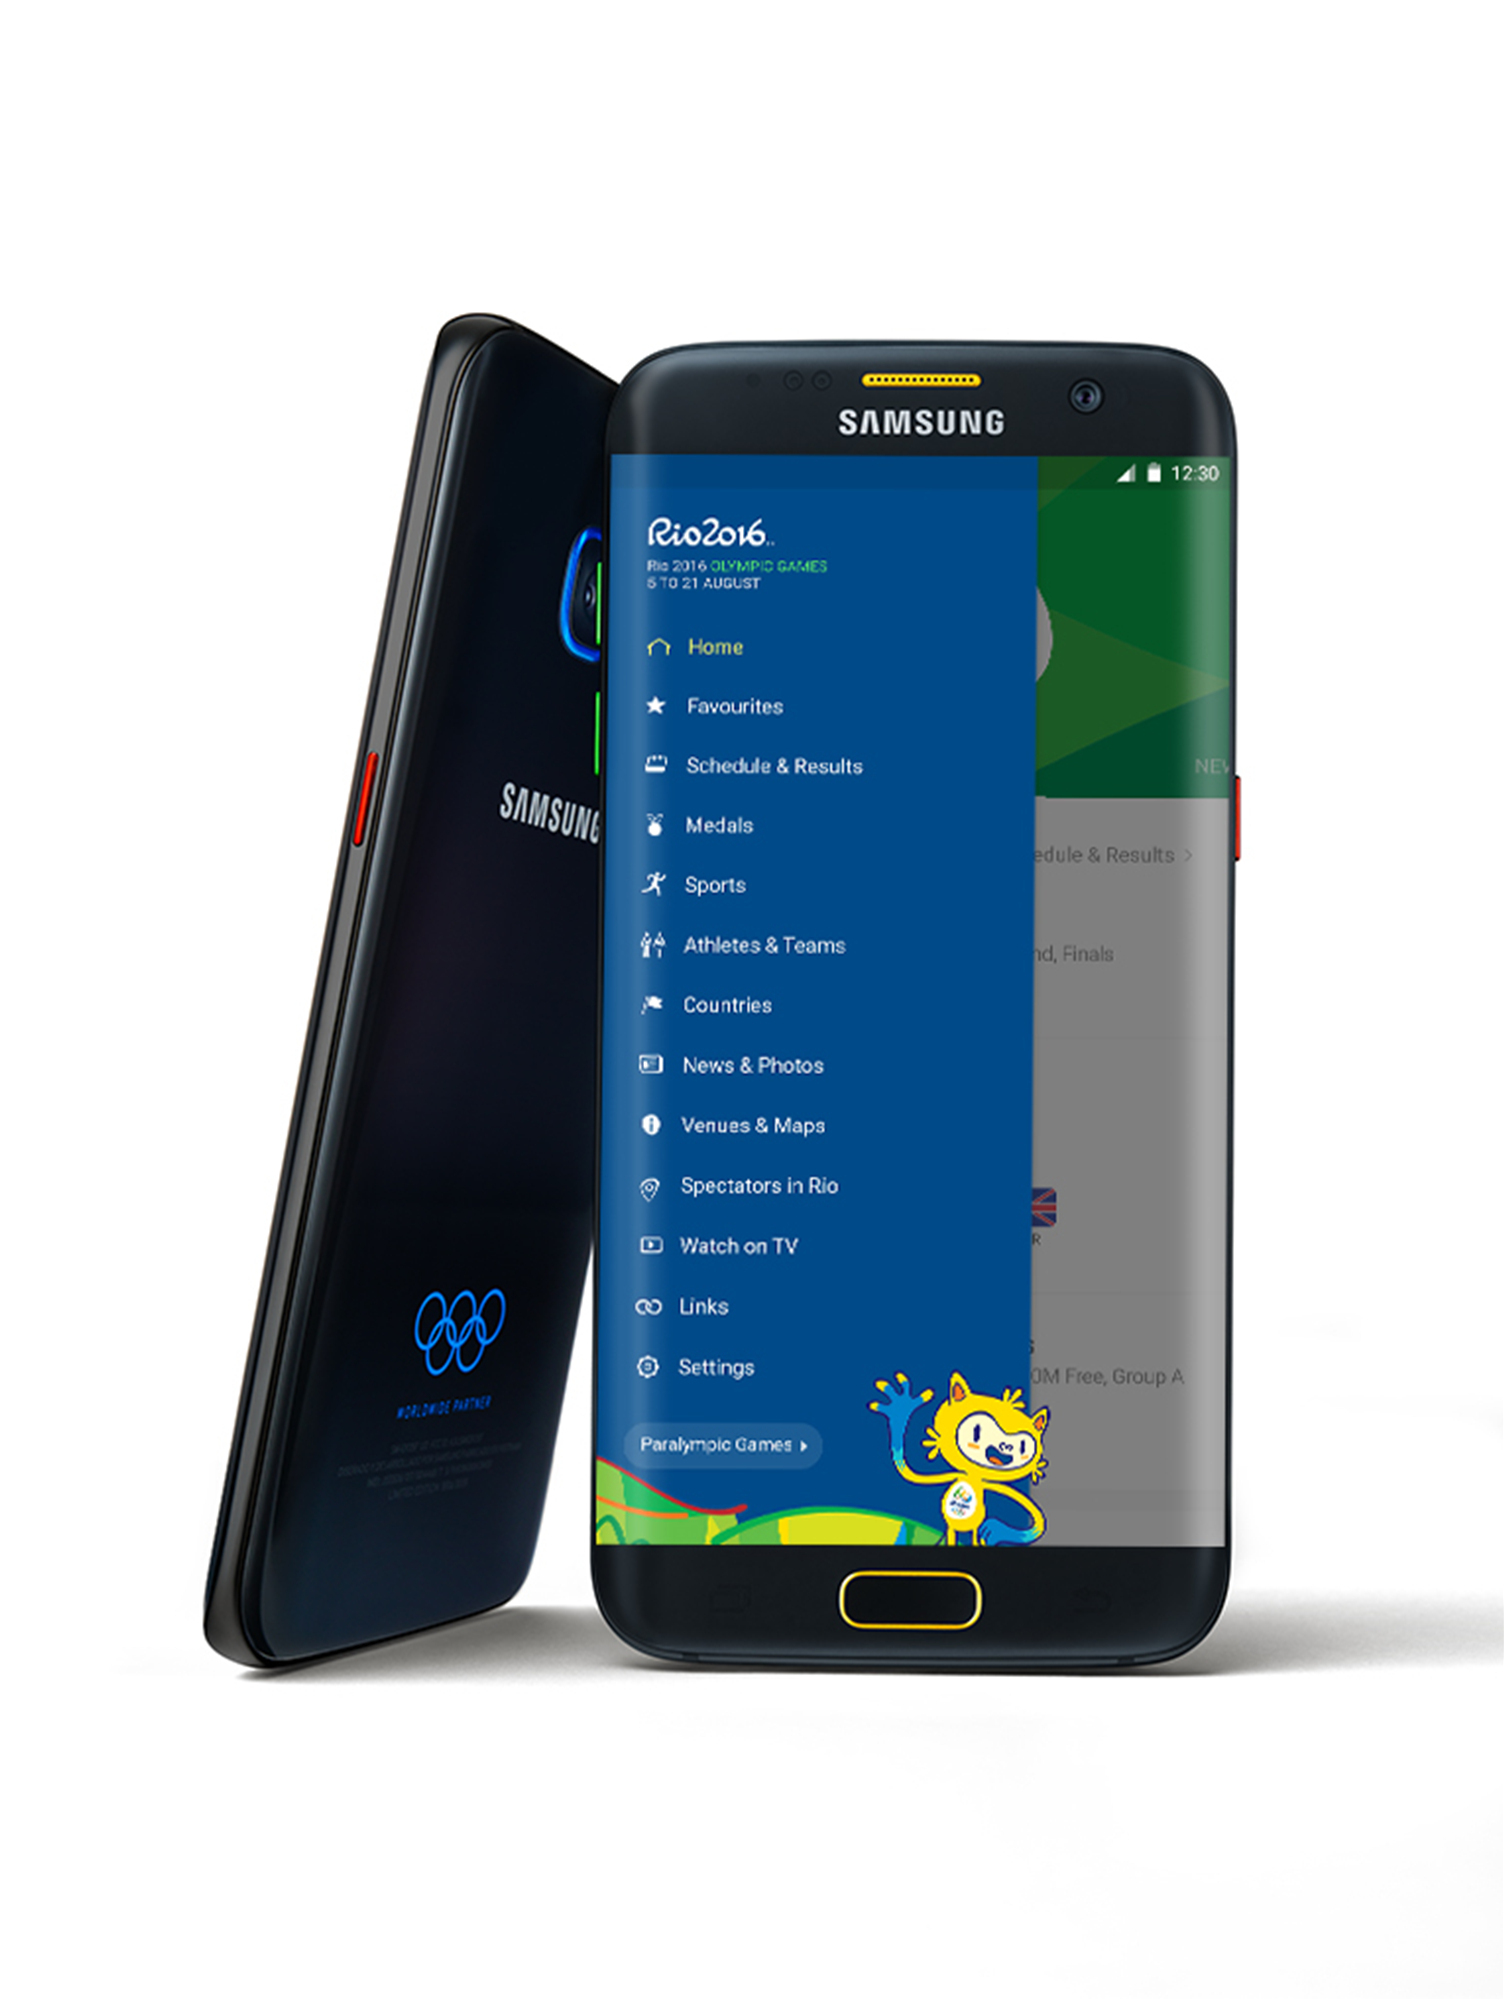 Samsung Announces Galaxy S7 edge Olympic Games Limited Edition